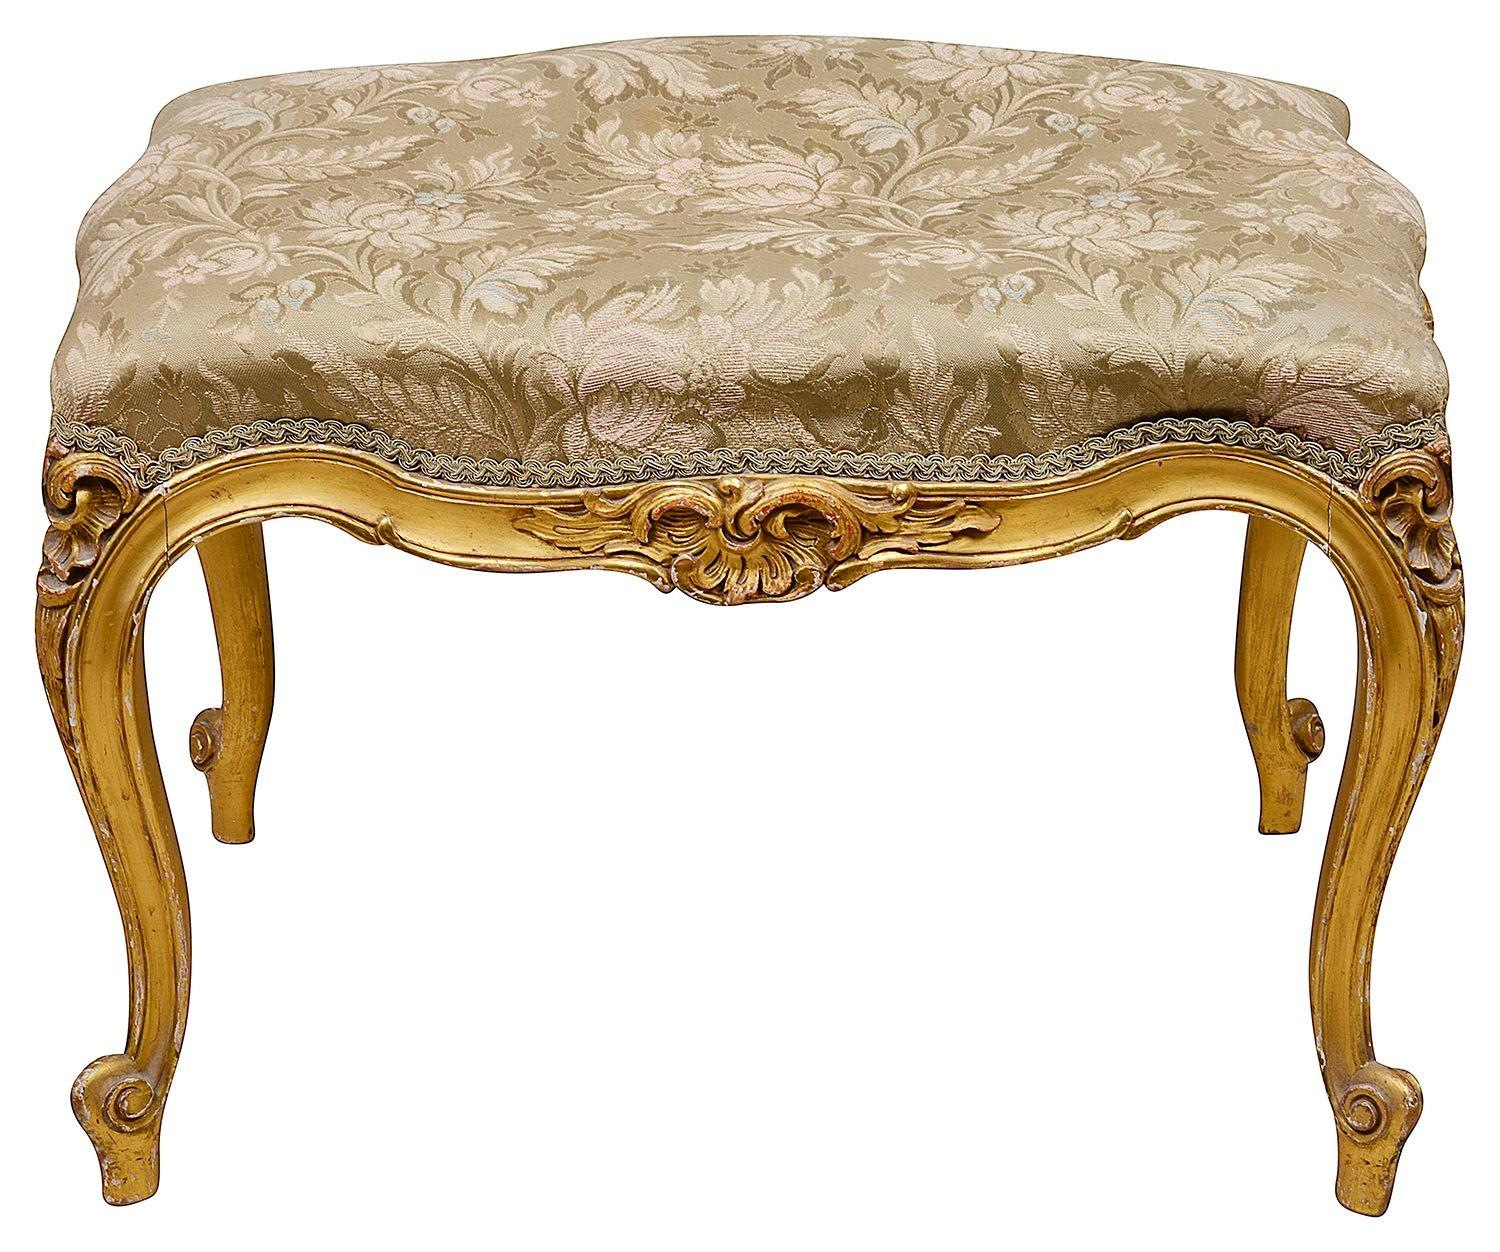 Carved 19th Century French Craved Giltwood Stool